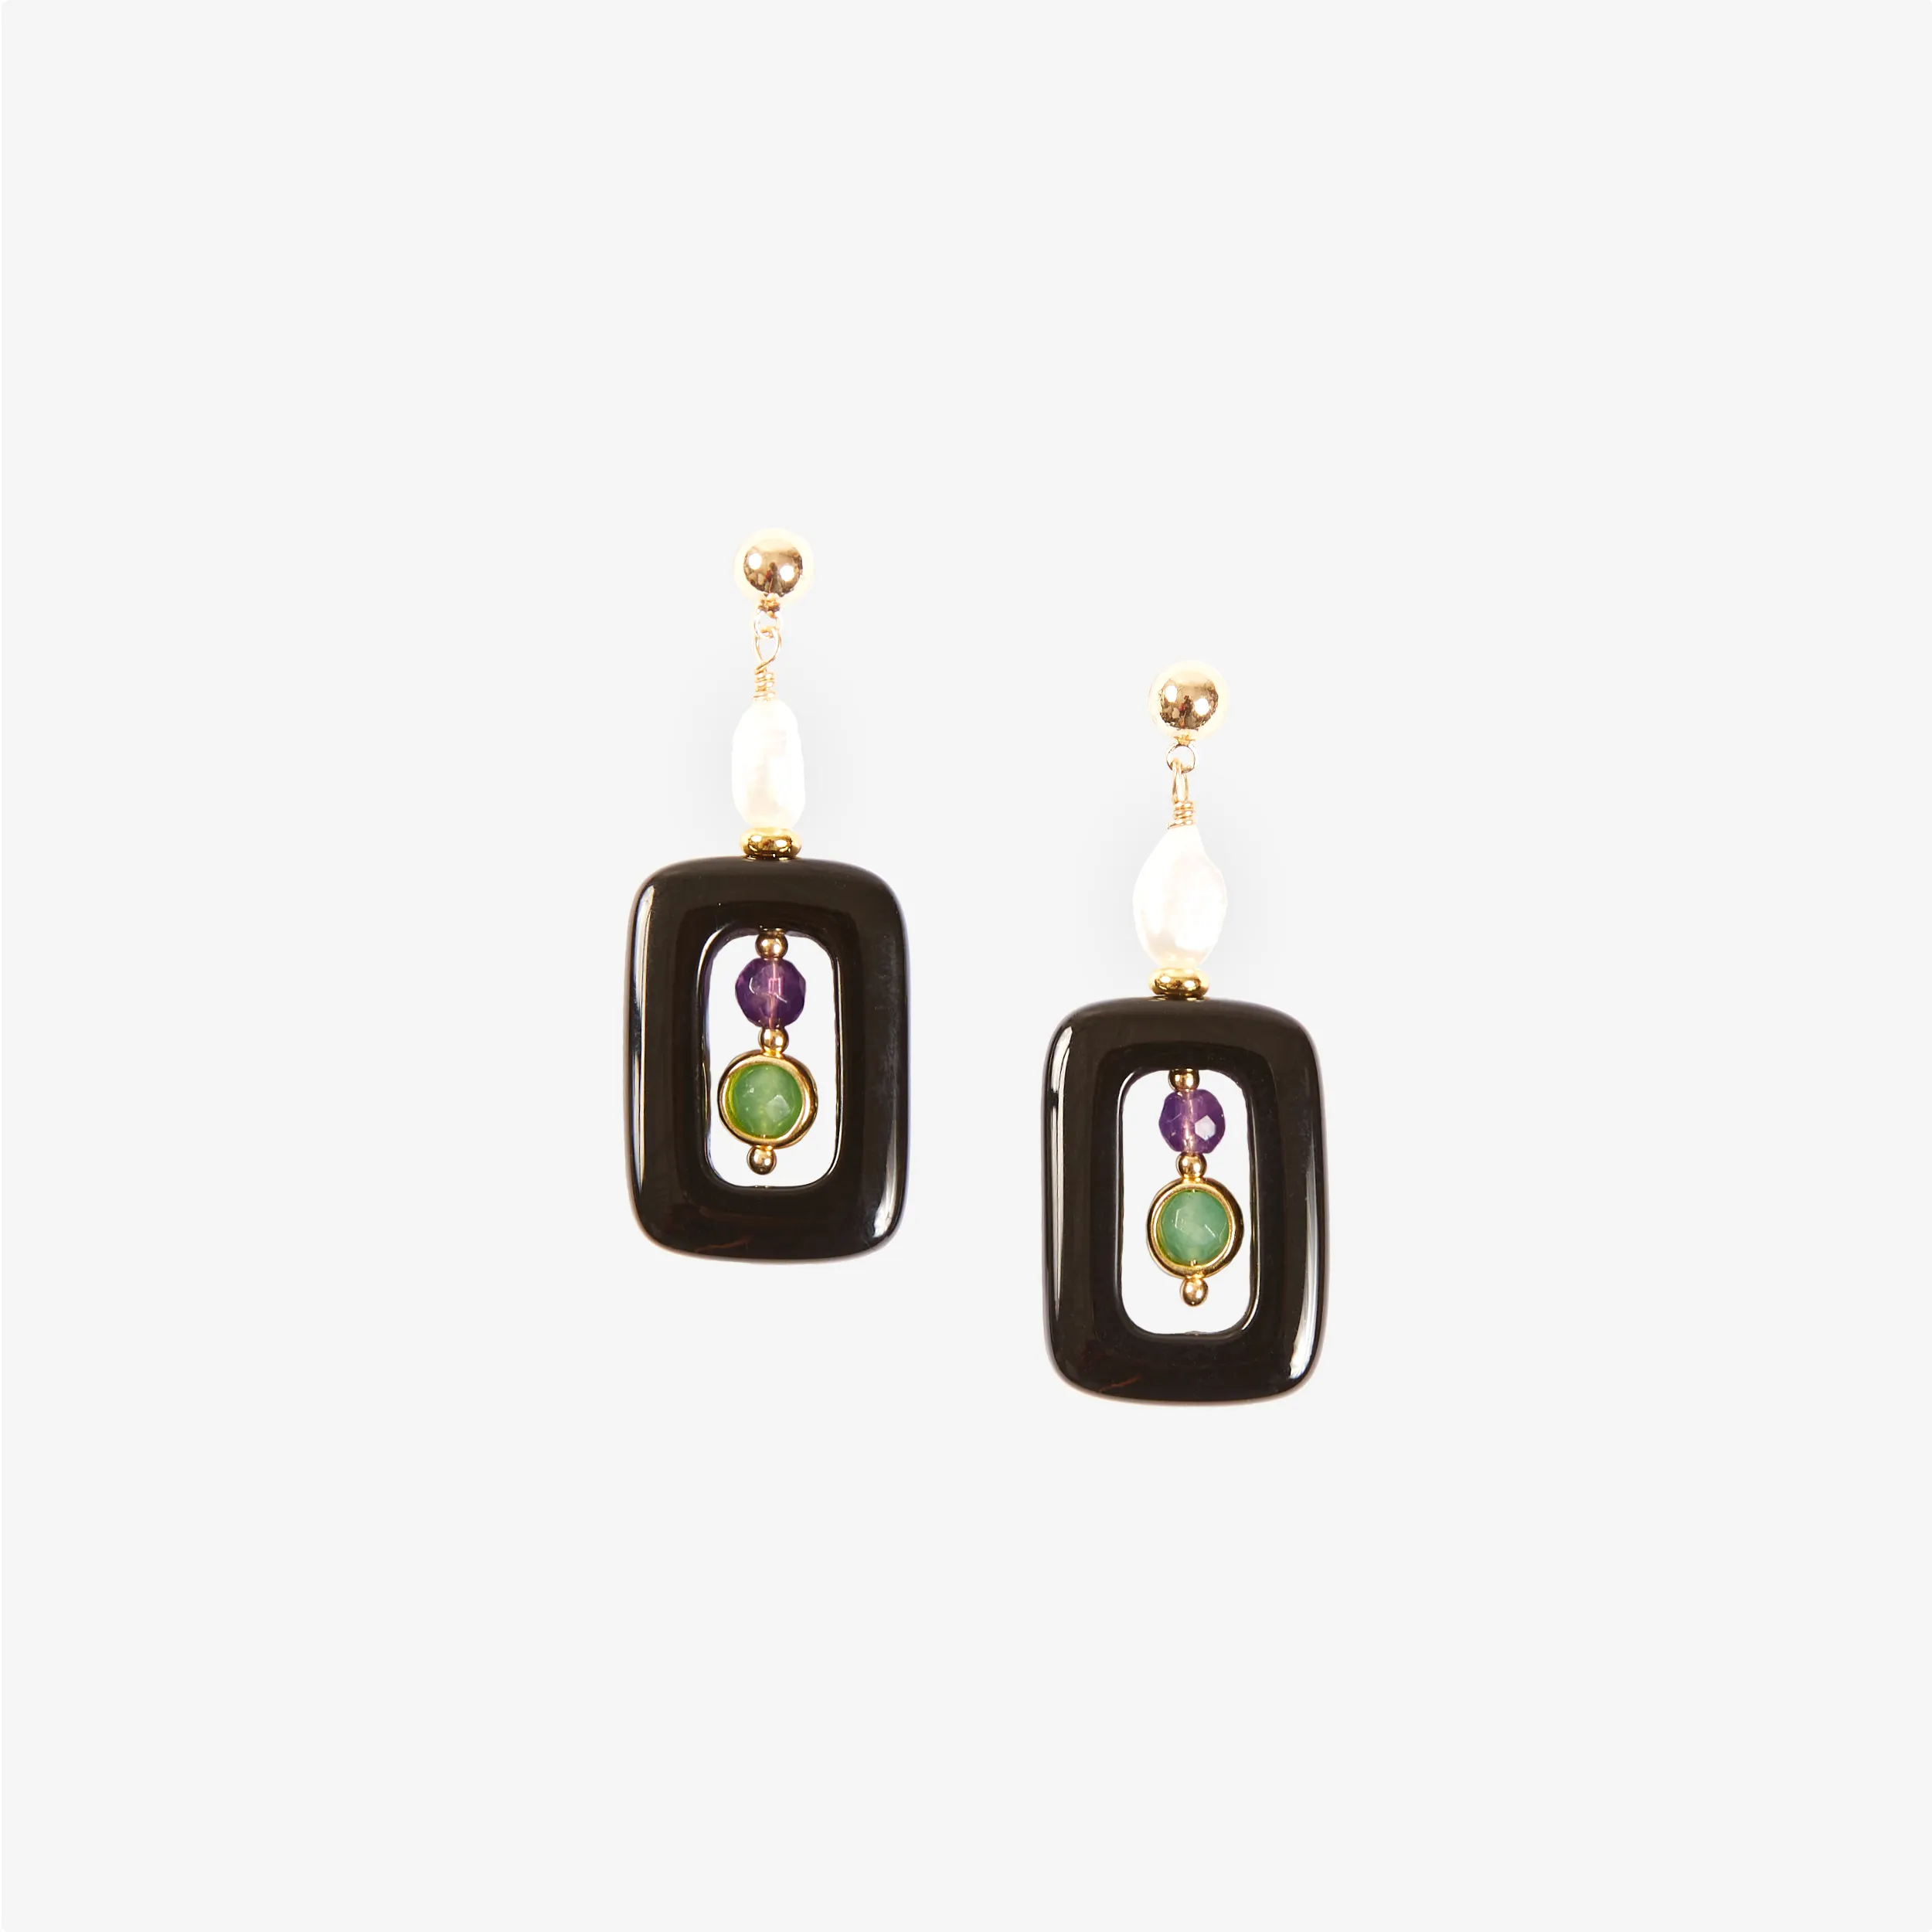 Ww Original Design Natural Black Agate Chinese Style Fashion Rotating Earrings